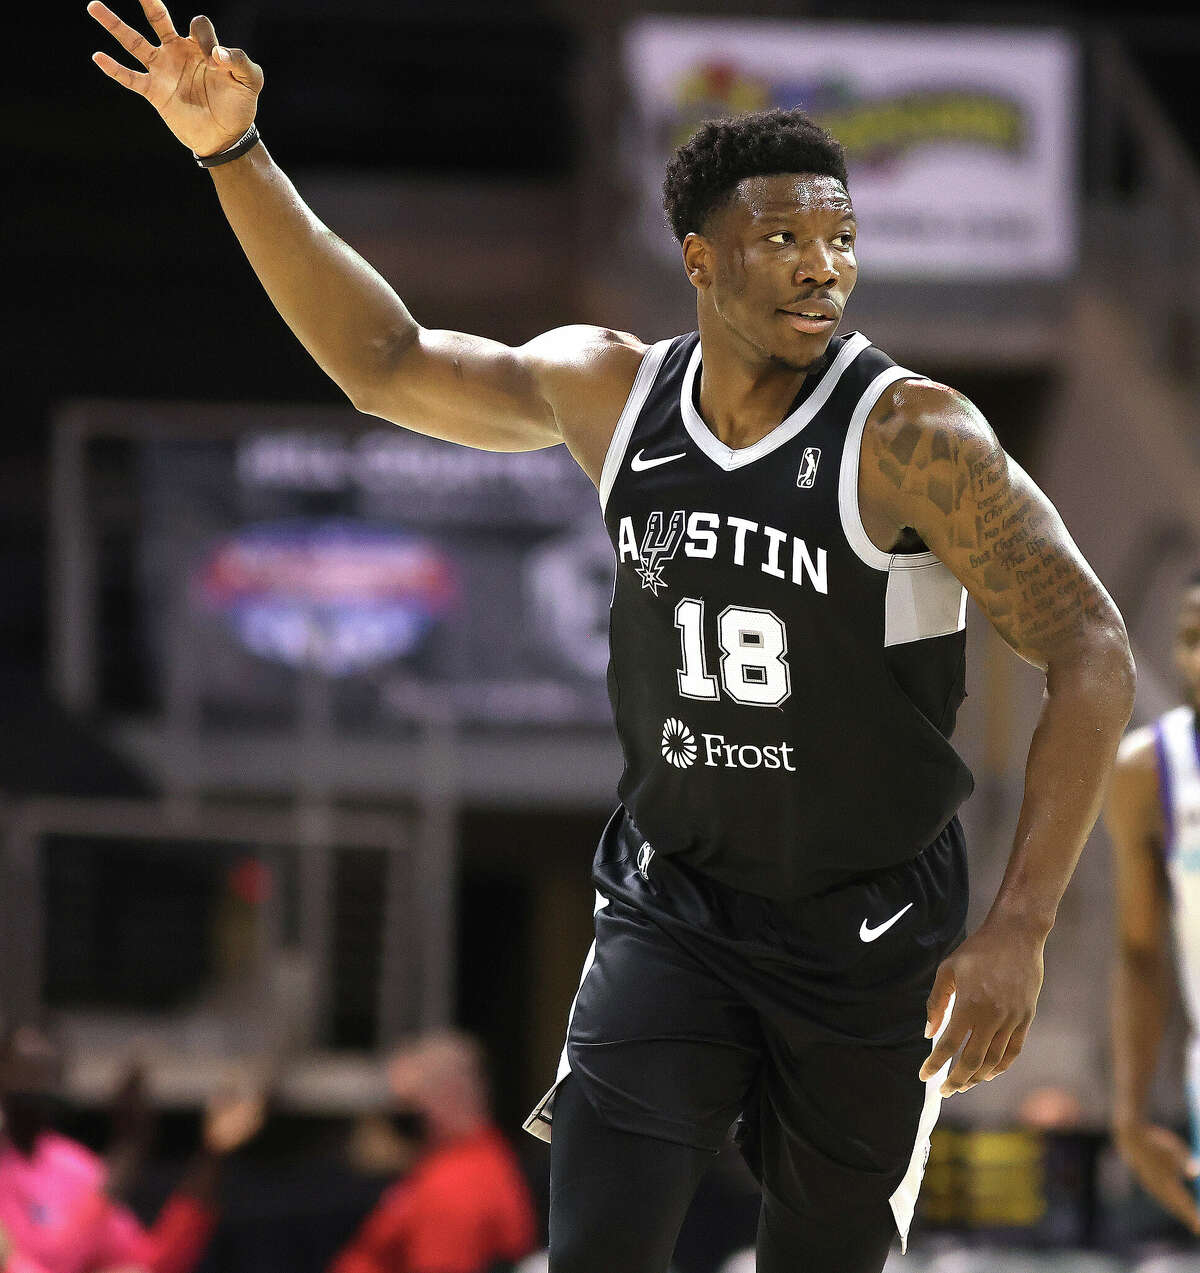 CEDAR PARK, TX - DECEMBER 2: Devontae Cacok #18 of the Austin Spurs reacts after making a 3-point shot against Greensboro Swarm during a NBA G-League game on December 2, 2021 at the H-E-B Center At Cedar Park in Cedar Park, Texas. Copyright 2021 NBAE (Photo by Chris Covatta/NBAE via Getty Images)